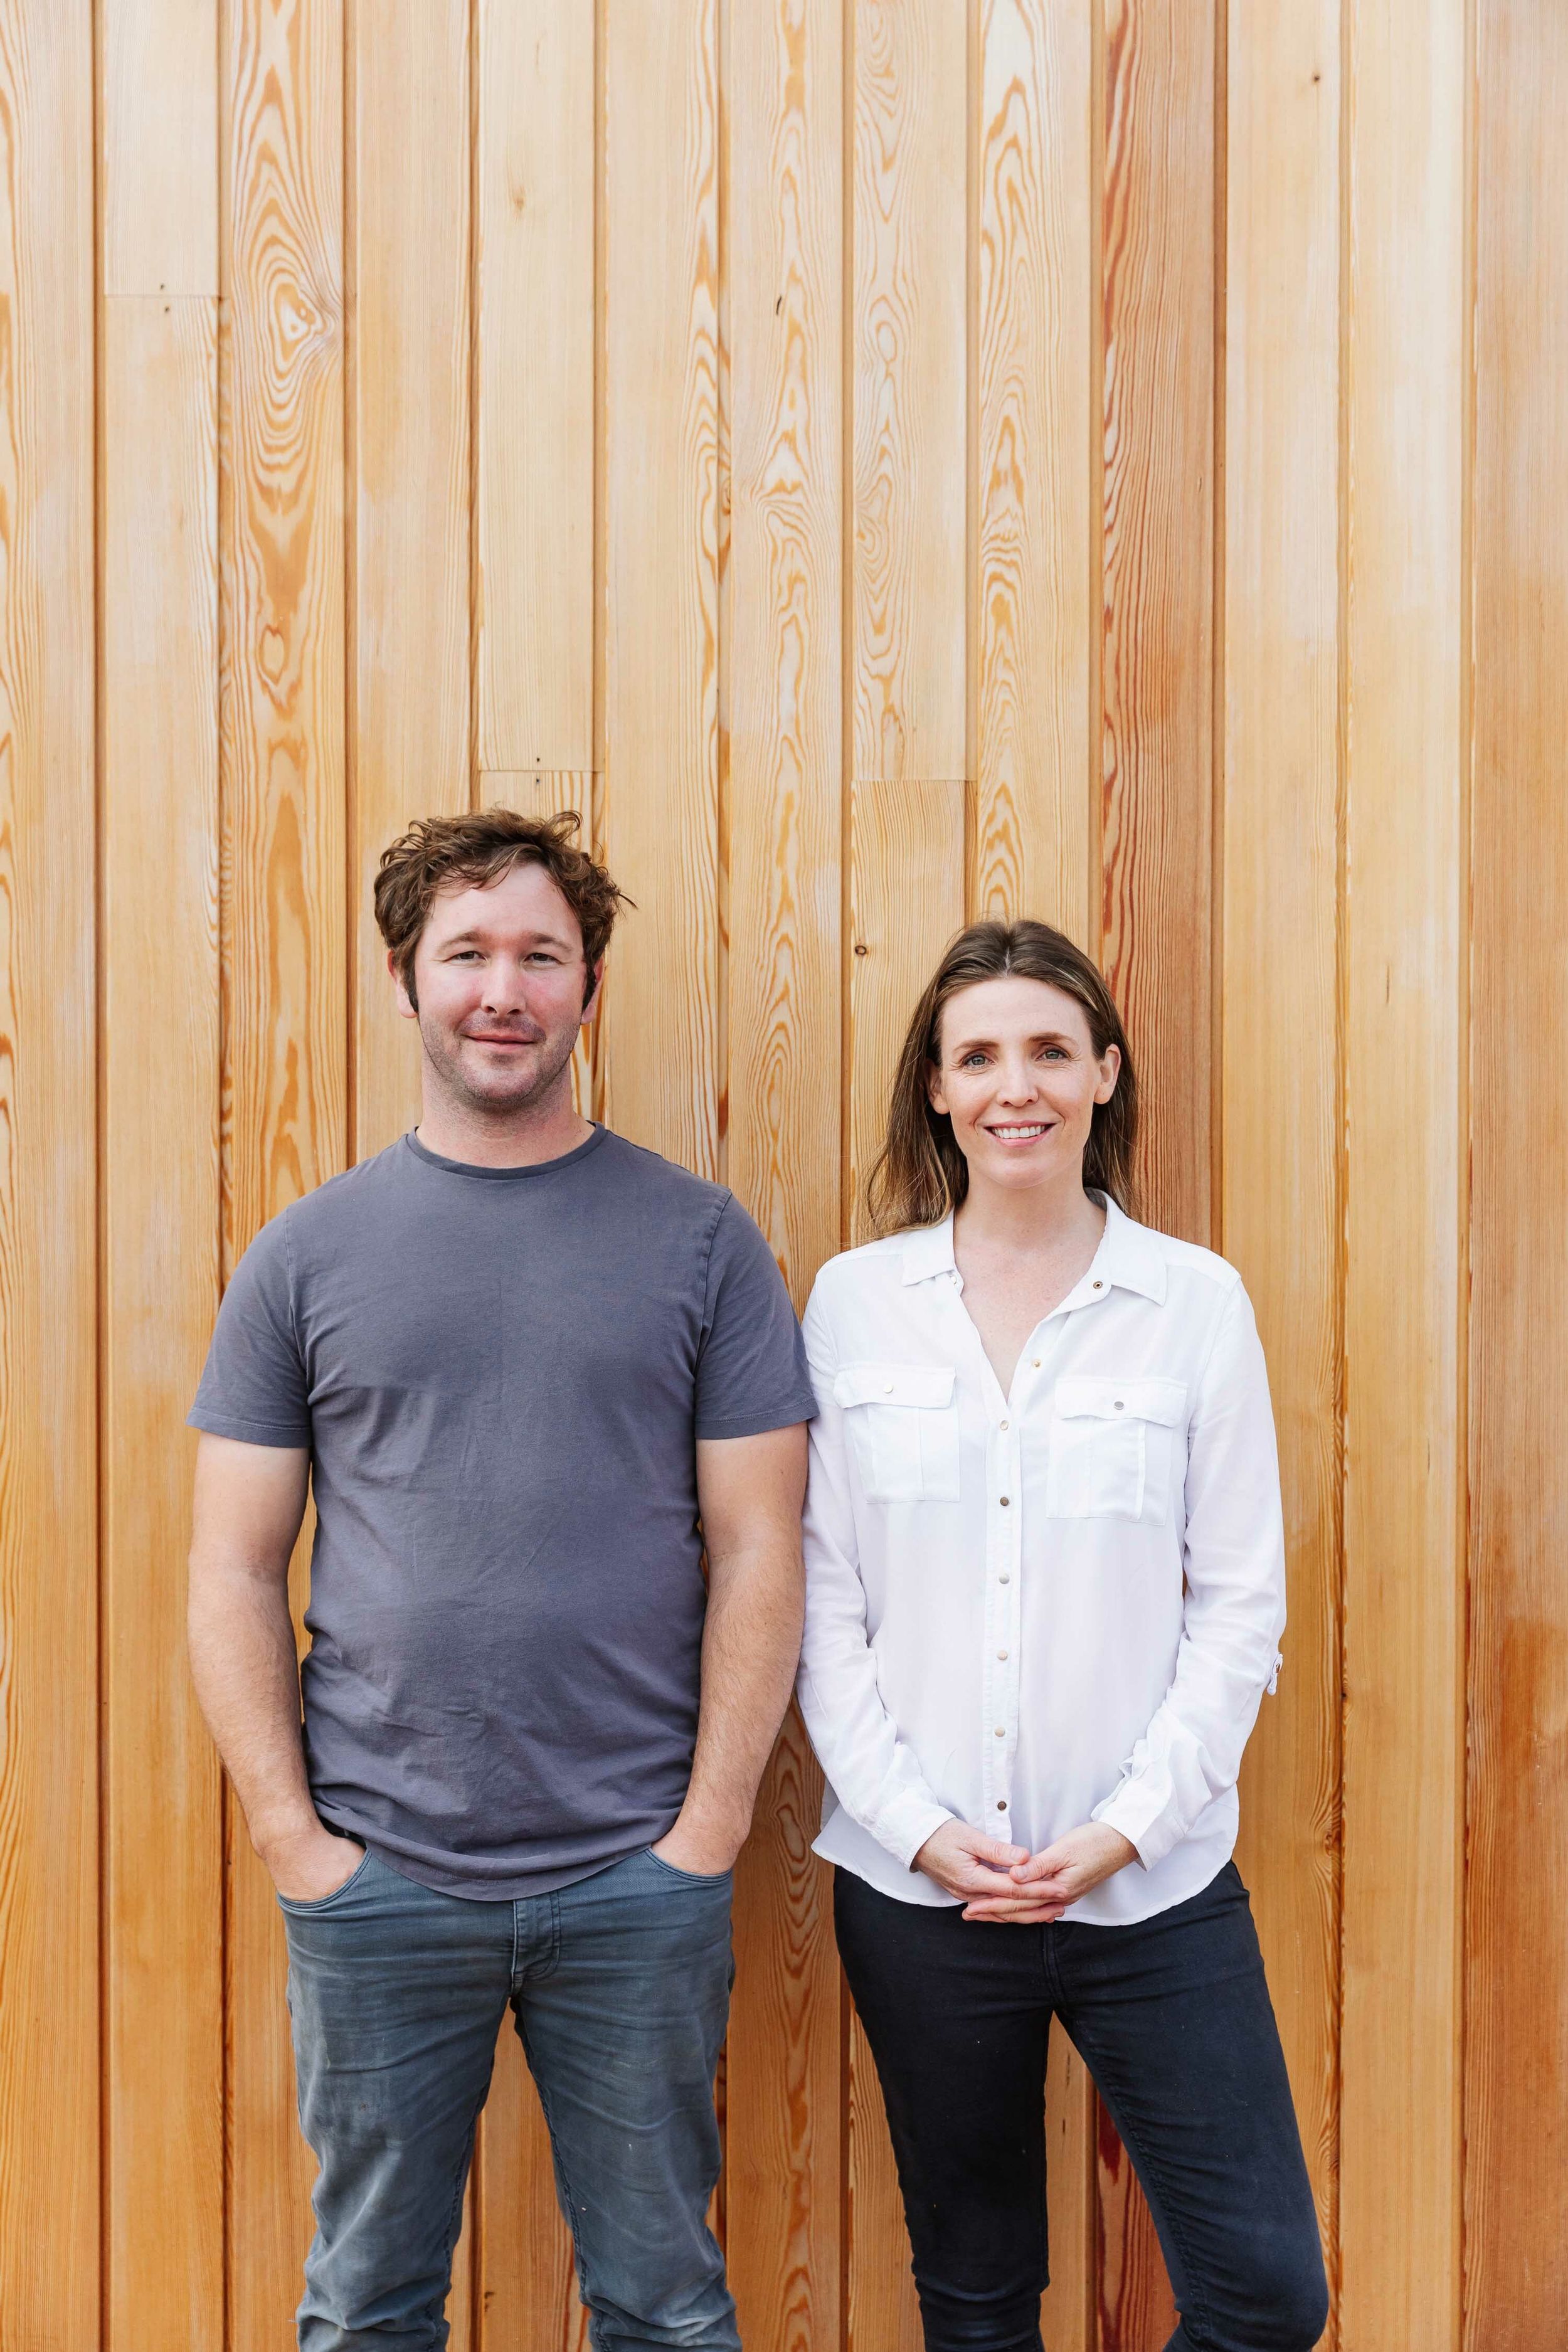 A man in a blue shirt and a woman in a white shirt stand together in front of a timber larch cladding.